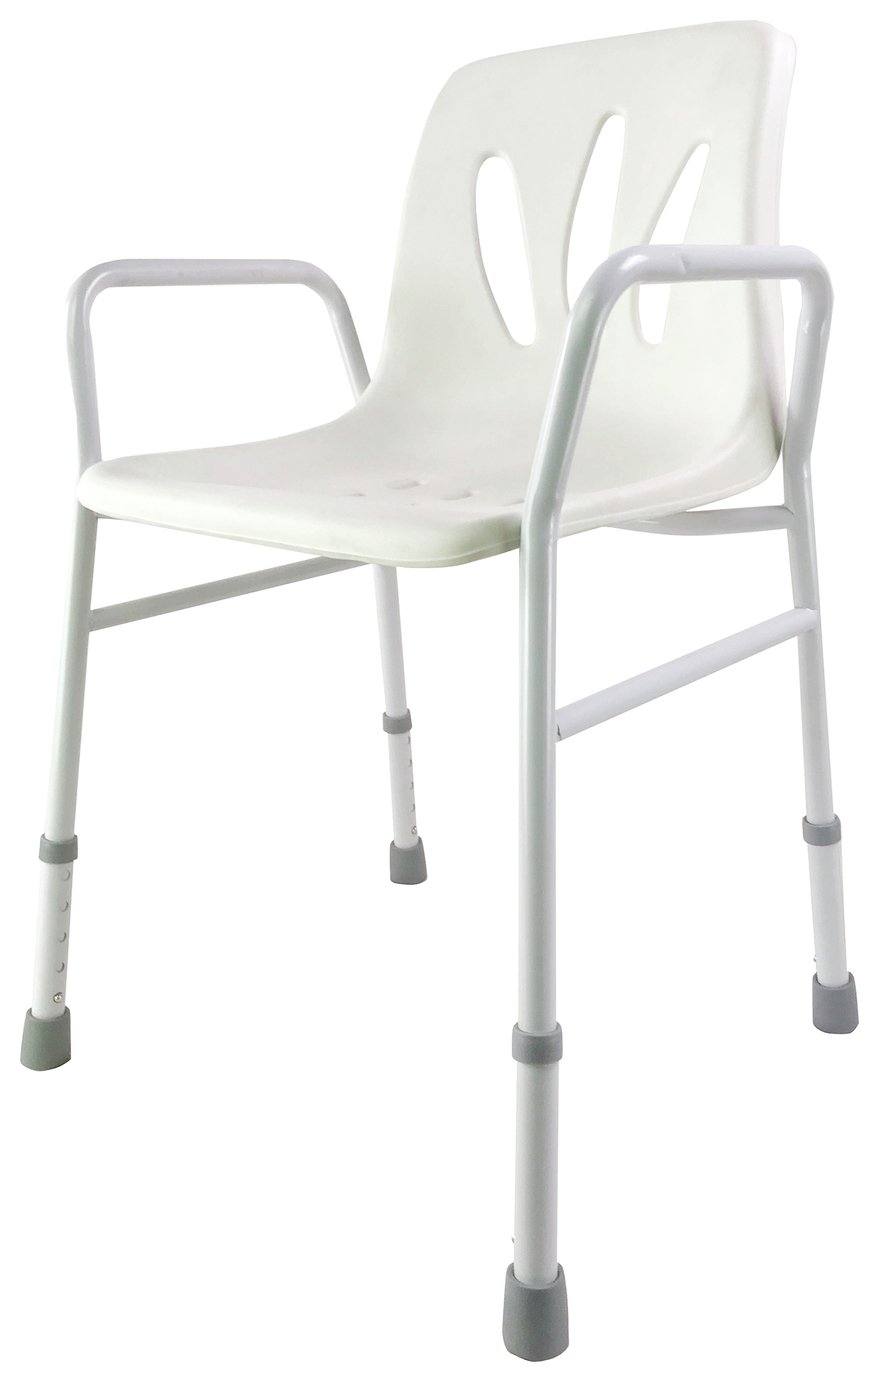 Aidapt Adjustable Height Shower Chair Review